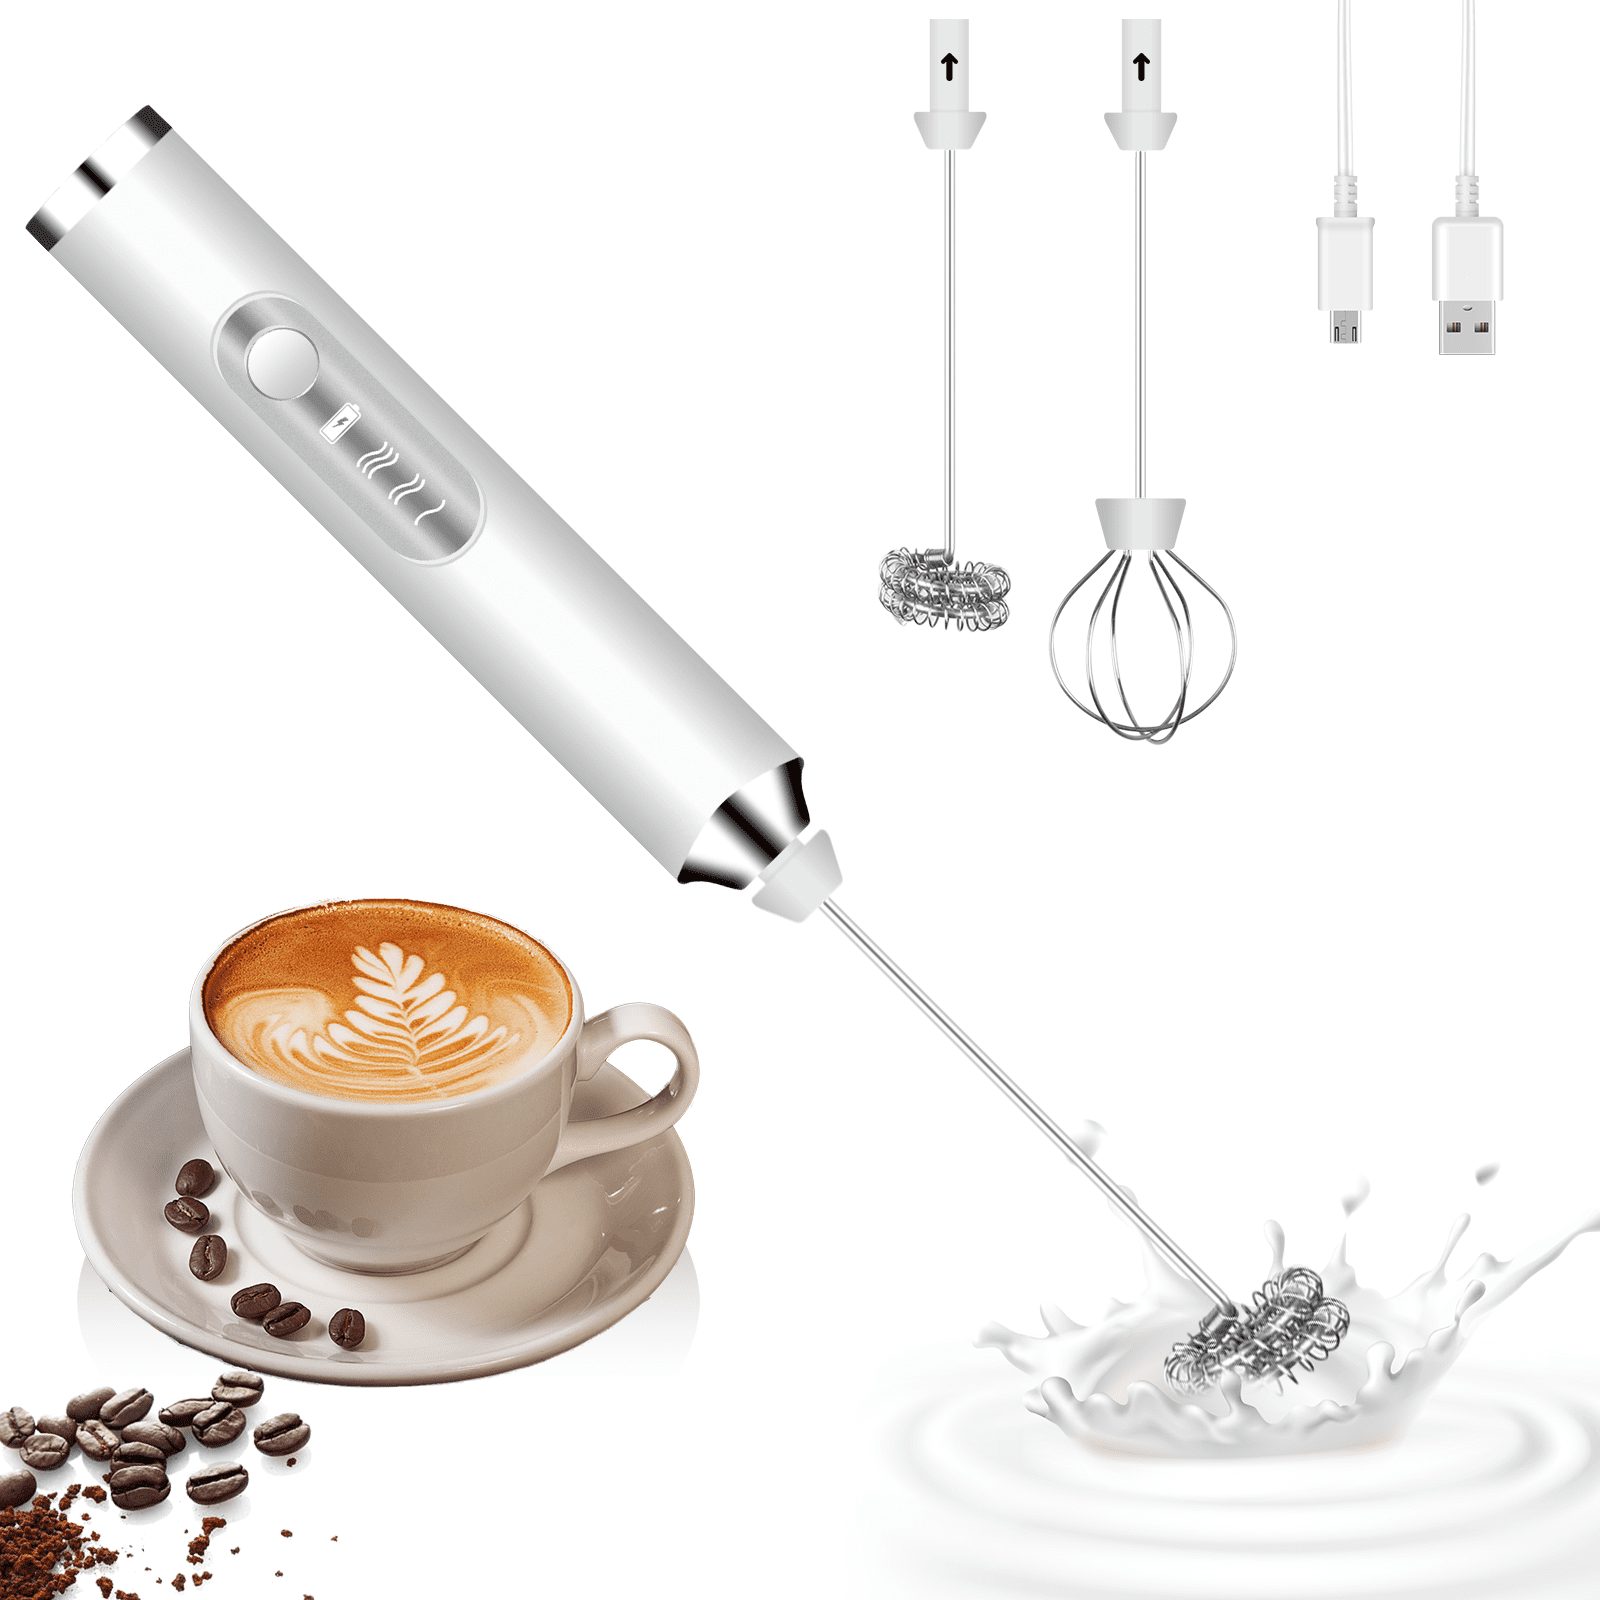 Handheld Milk Frother - White